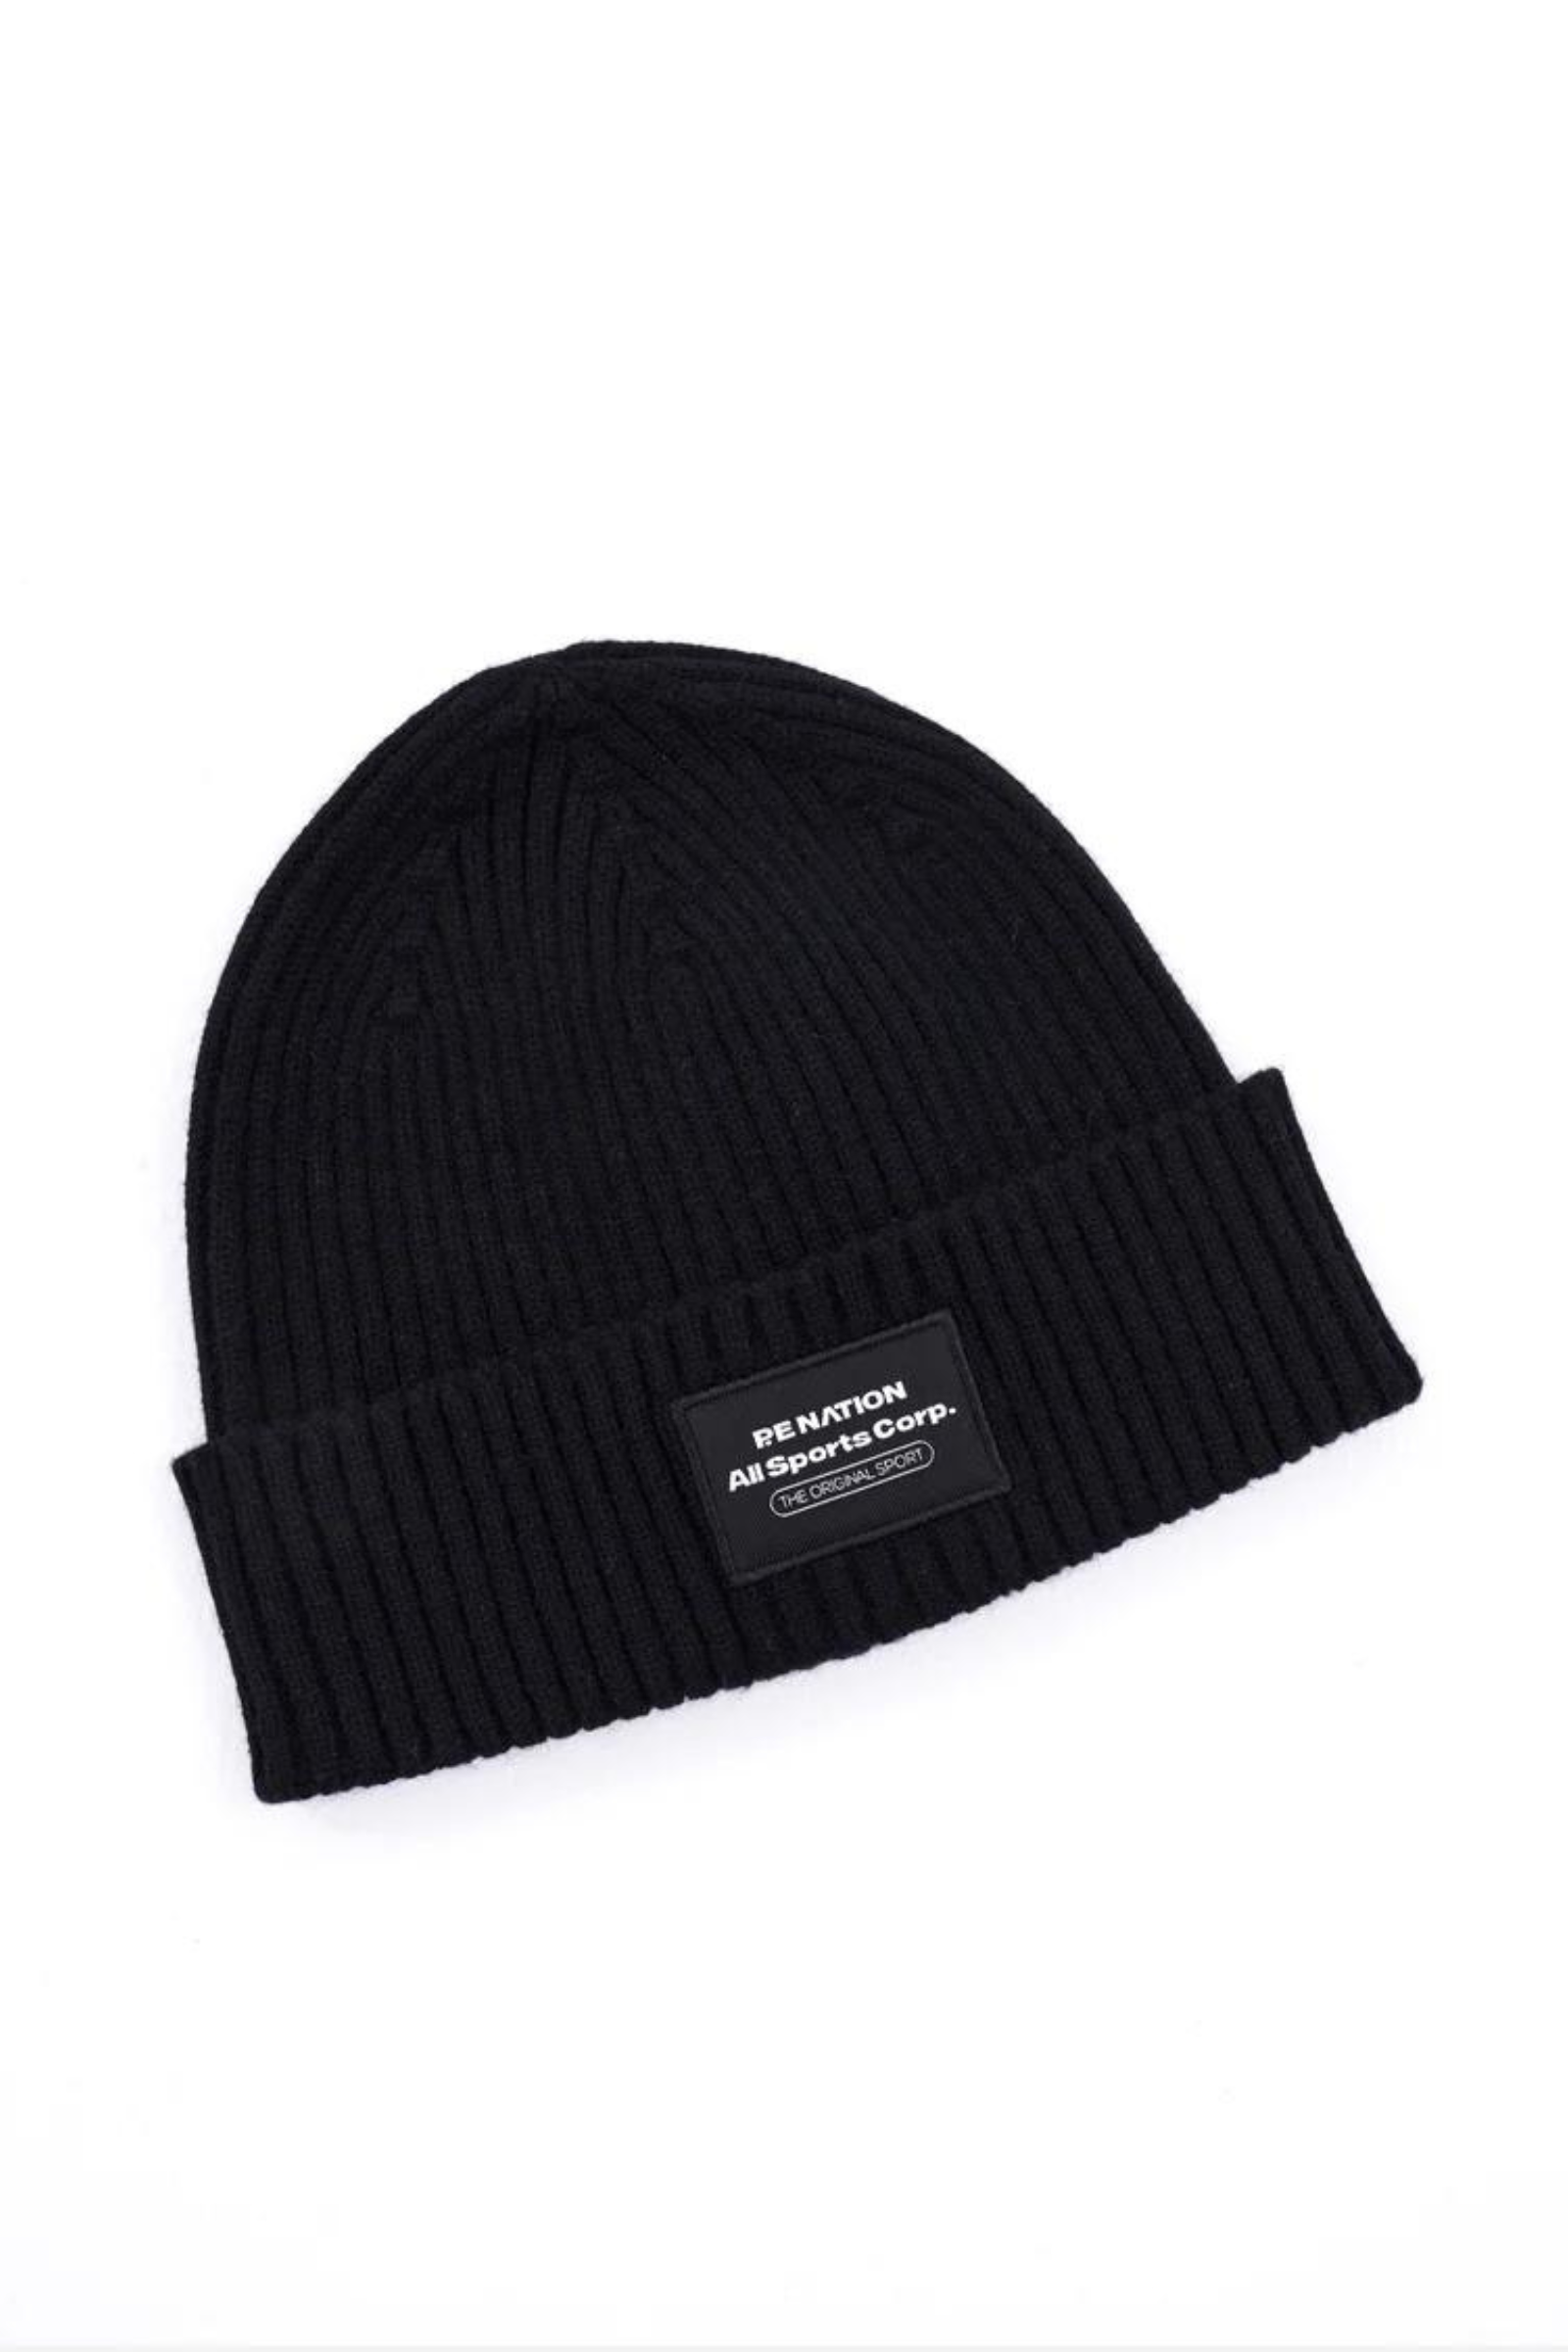 SOUTH SIDE KNIT BEANIE IN BLACK